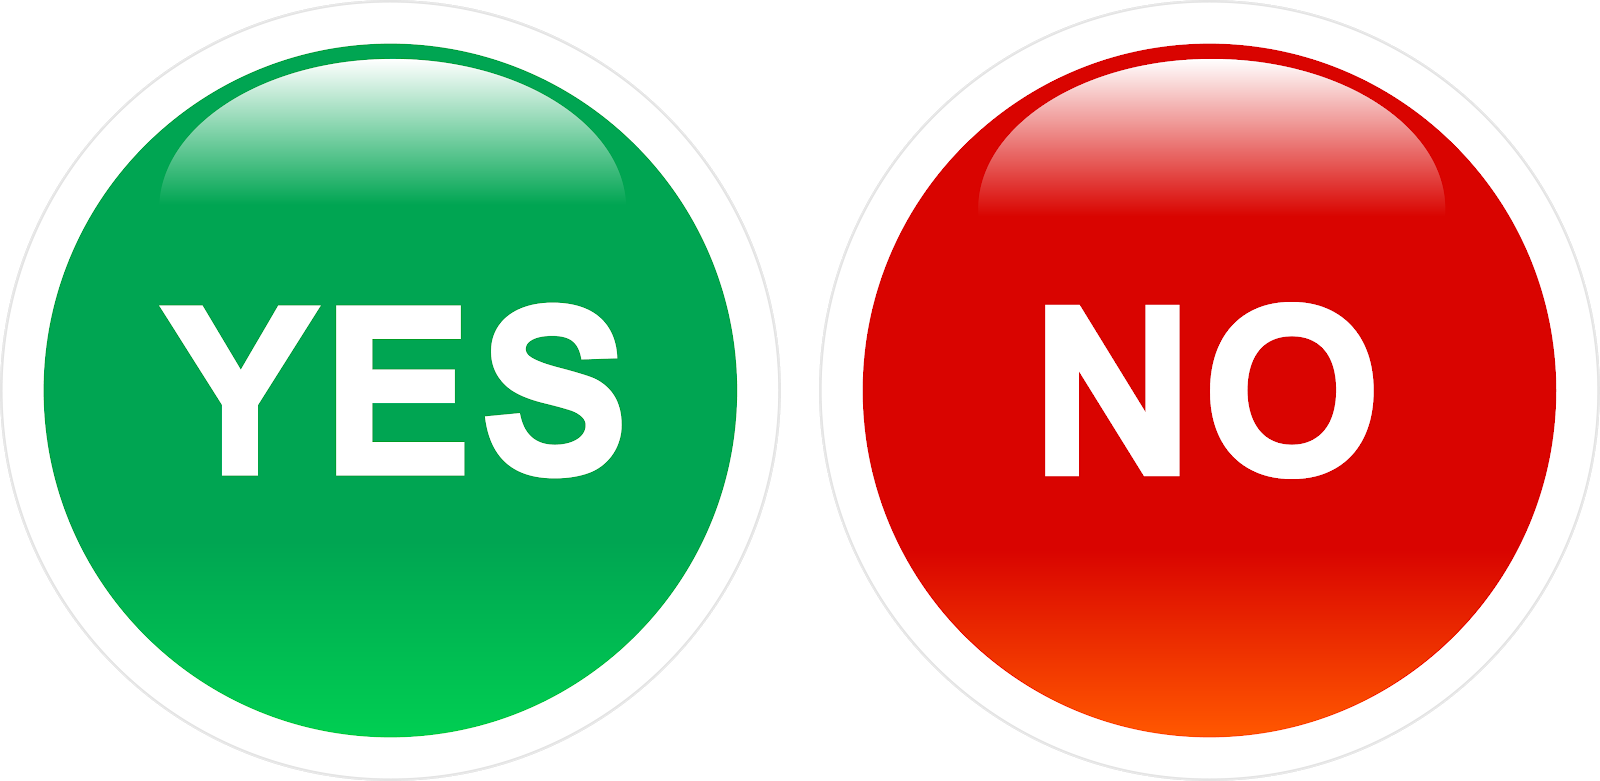 Download Yes No Buttons Vector Download Svg Eps Png Psd Ai Color Free El Fonts Vectors SVG, PNG, EPS, DXF File